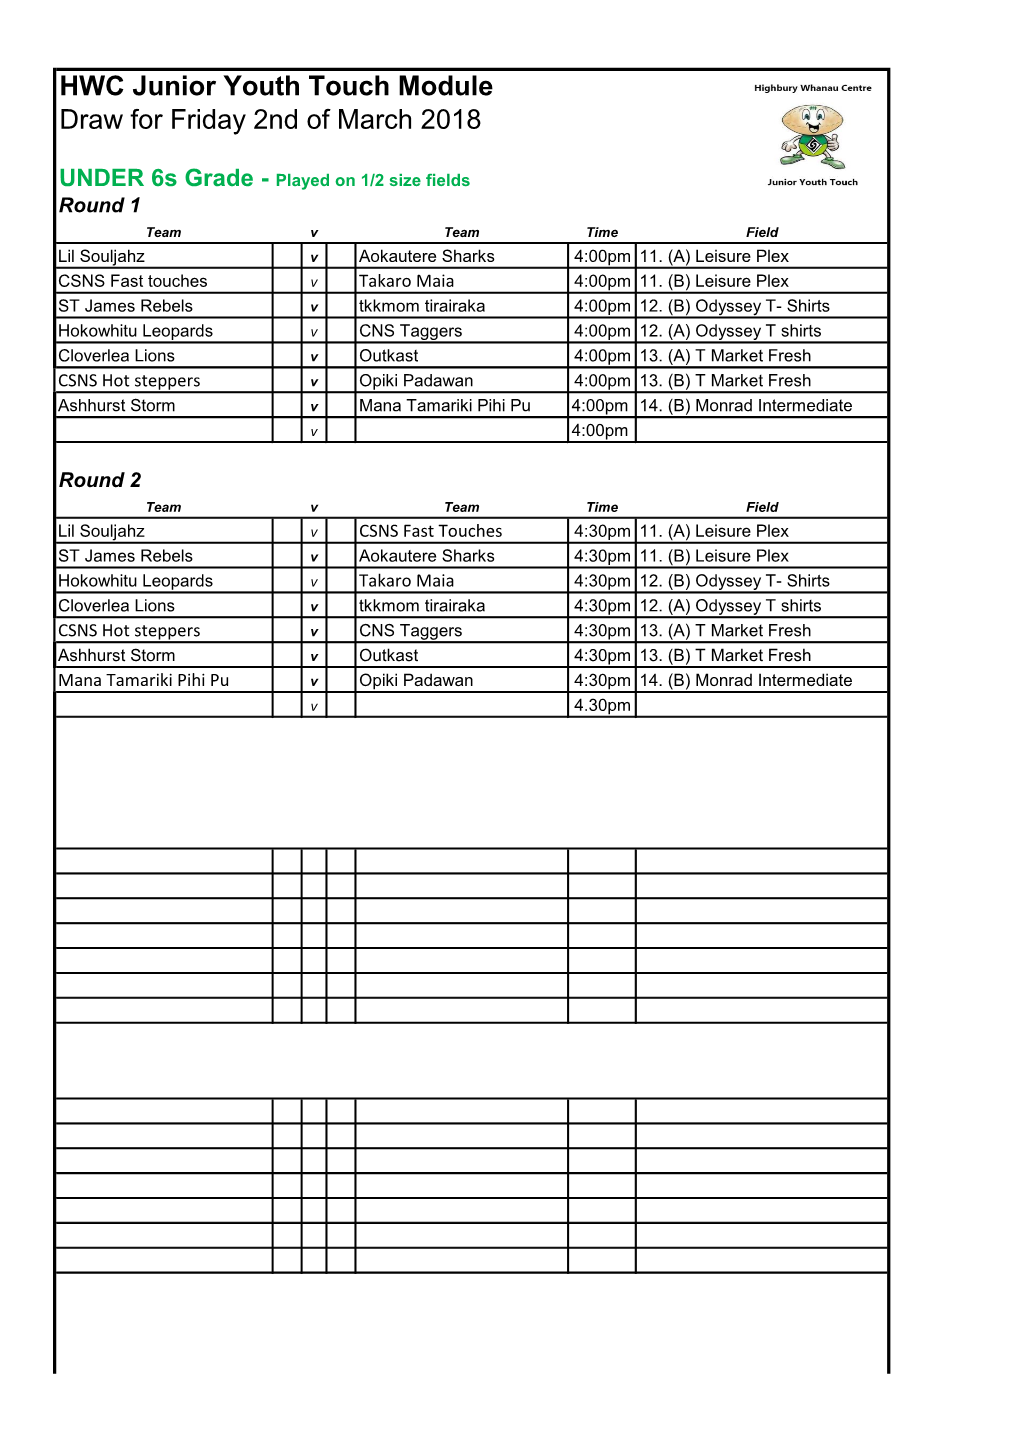 HWC Junior Youth Touch Module Draw for Friday 2Nd of March 2018